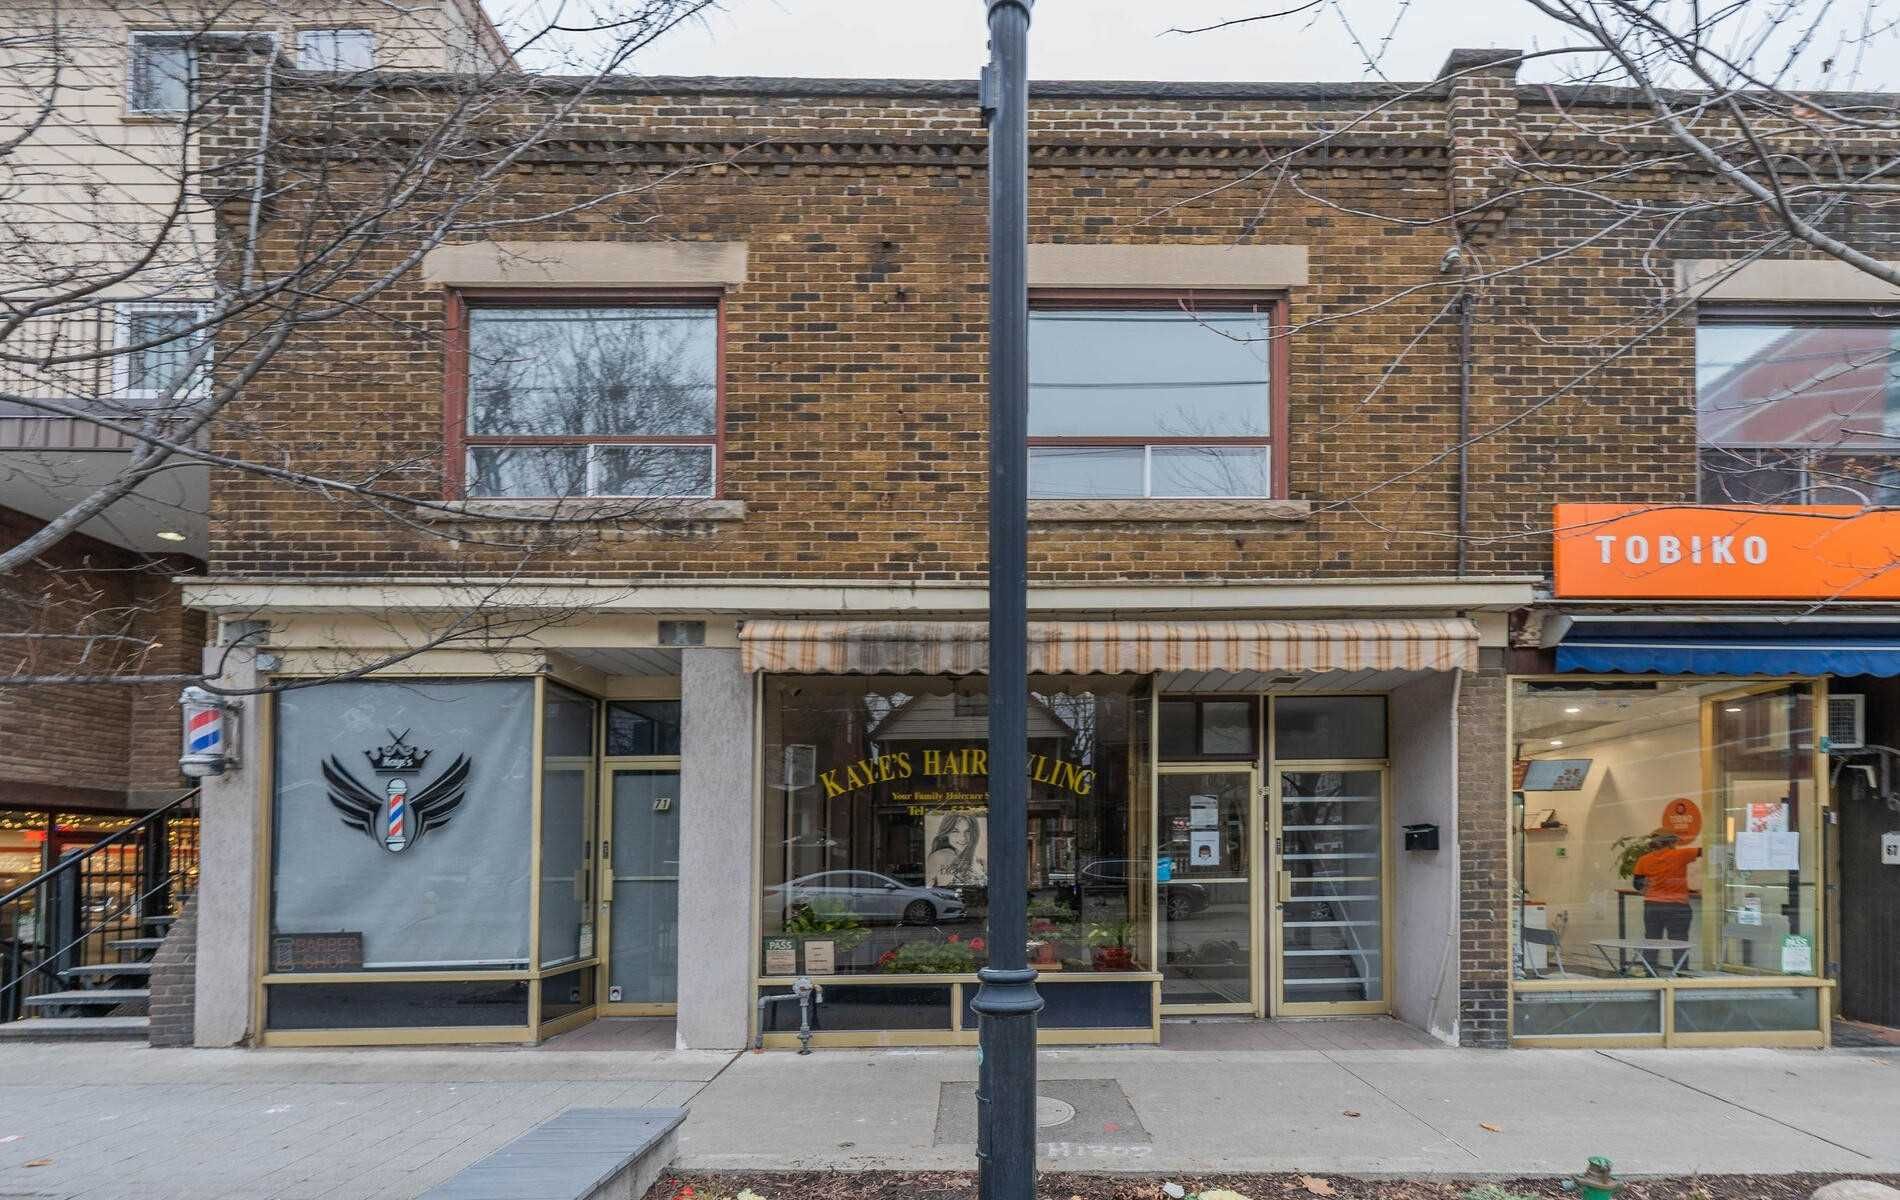 Main Photo: 69 - 71 Roncesvalles Avenue in Toronto: Roncesvalles Property for sale (Toronto W01)  : MLS®# W5839930